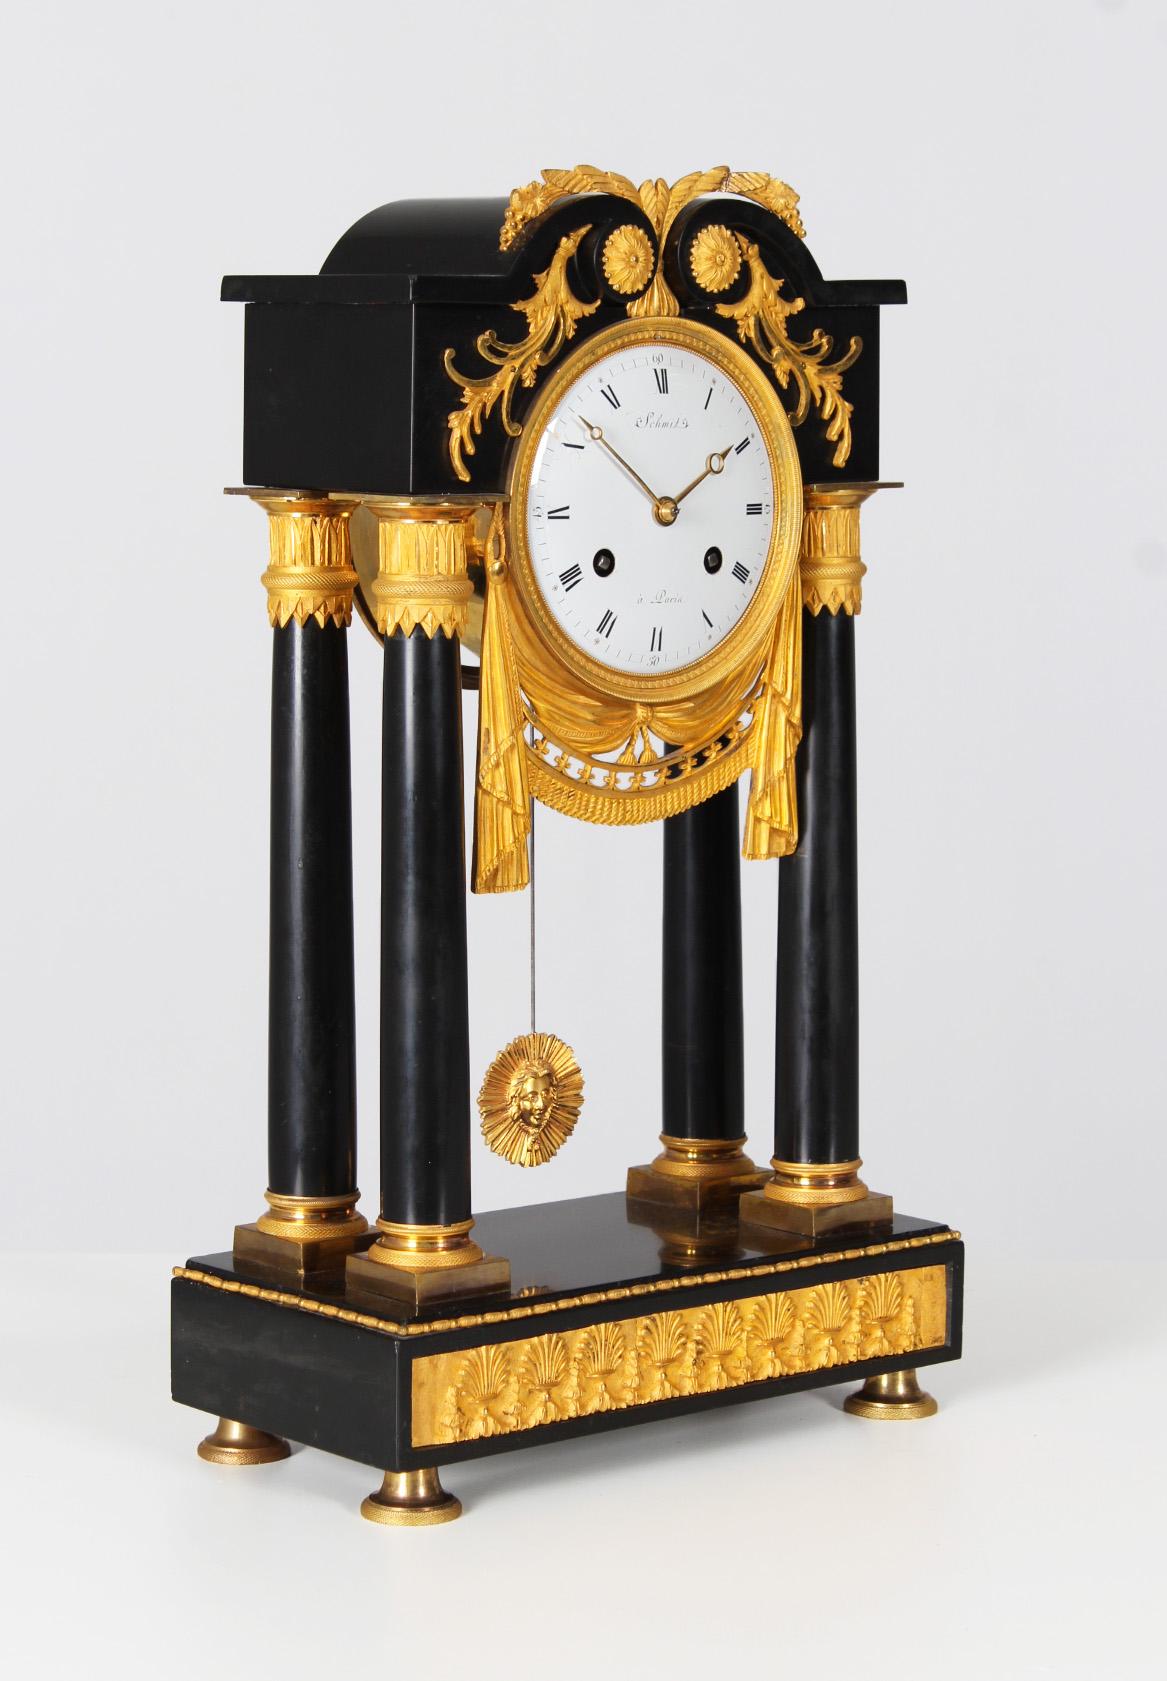 Antique portal clock

France
marble, bronze, enamel
Directoire around 1800

Dimensions: H x W x D: 46 x 28 x 14 cm

Description:
Antique portal clock in polished black marble with fire-gilded appliques.

Pedestal standing on bell feet